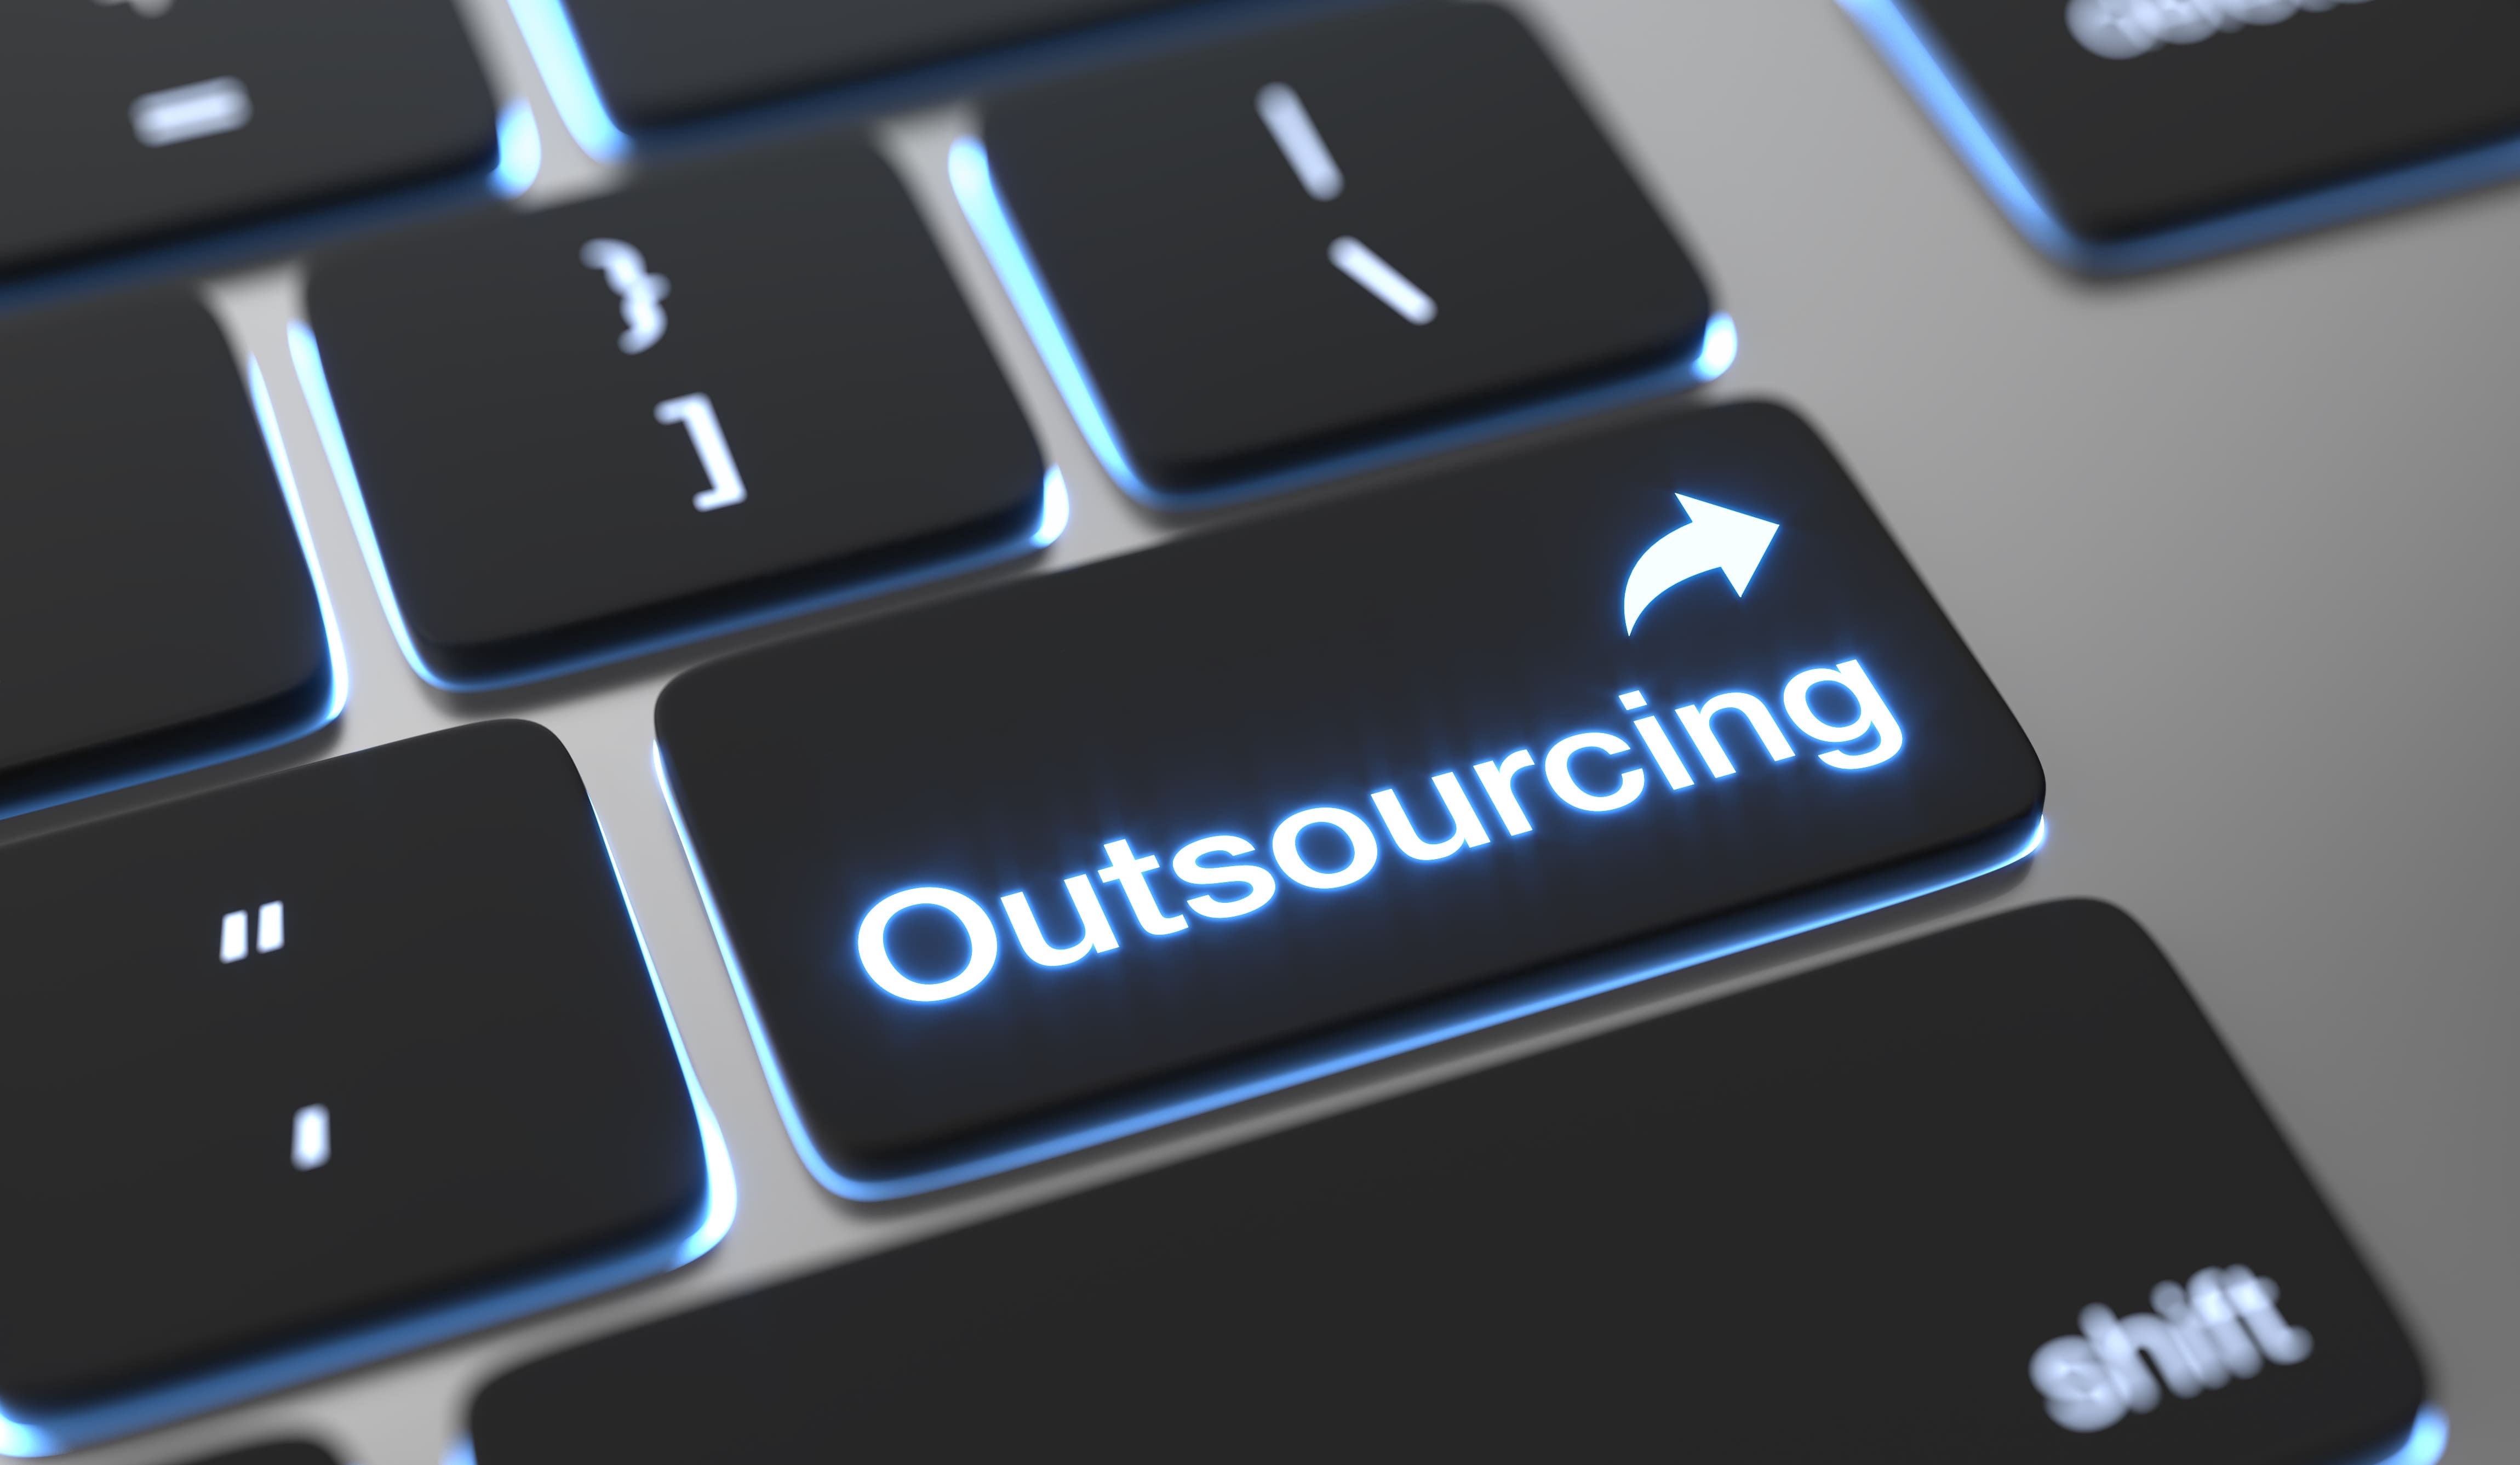 Outsourcing vs Outstaffing: Whatâ€™s the Difference and Which Should You Choose? 